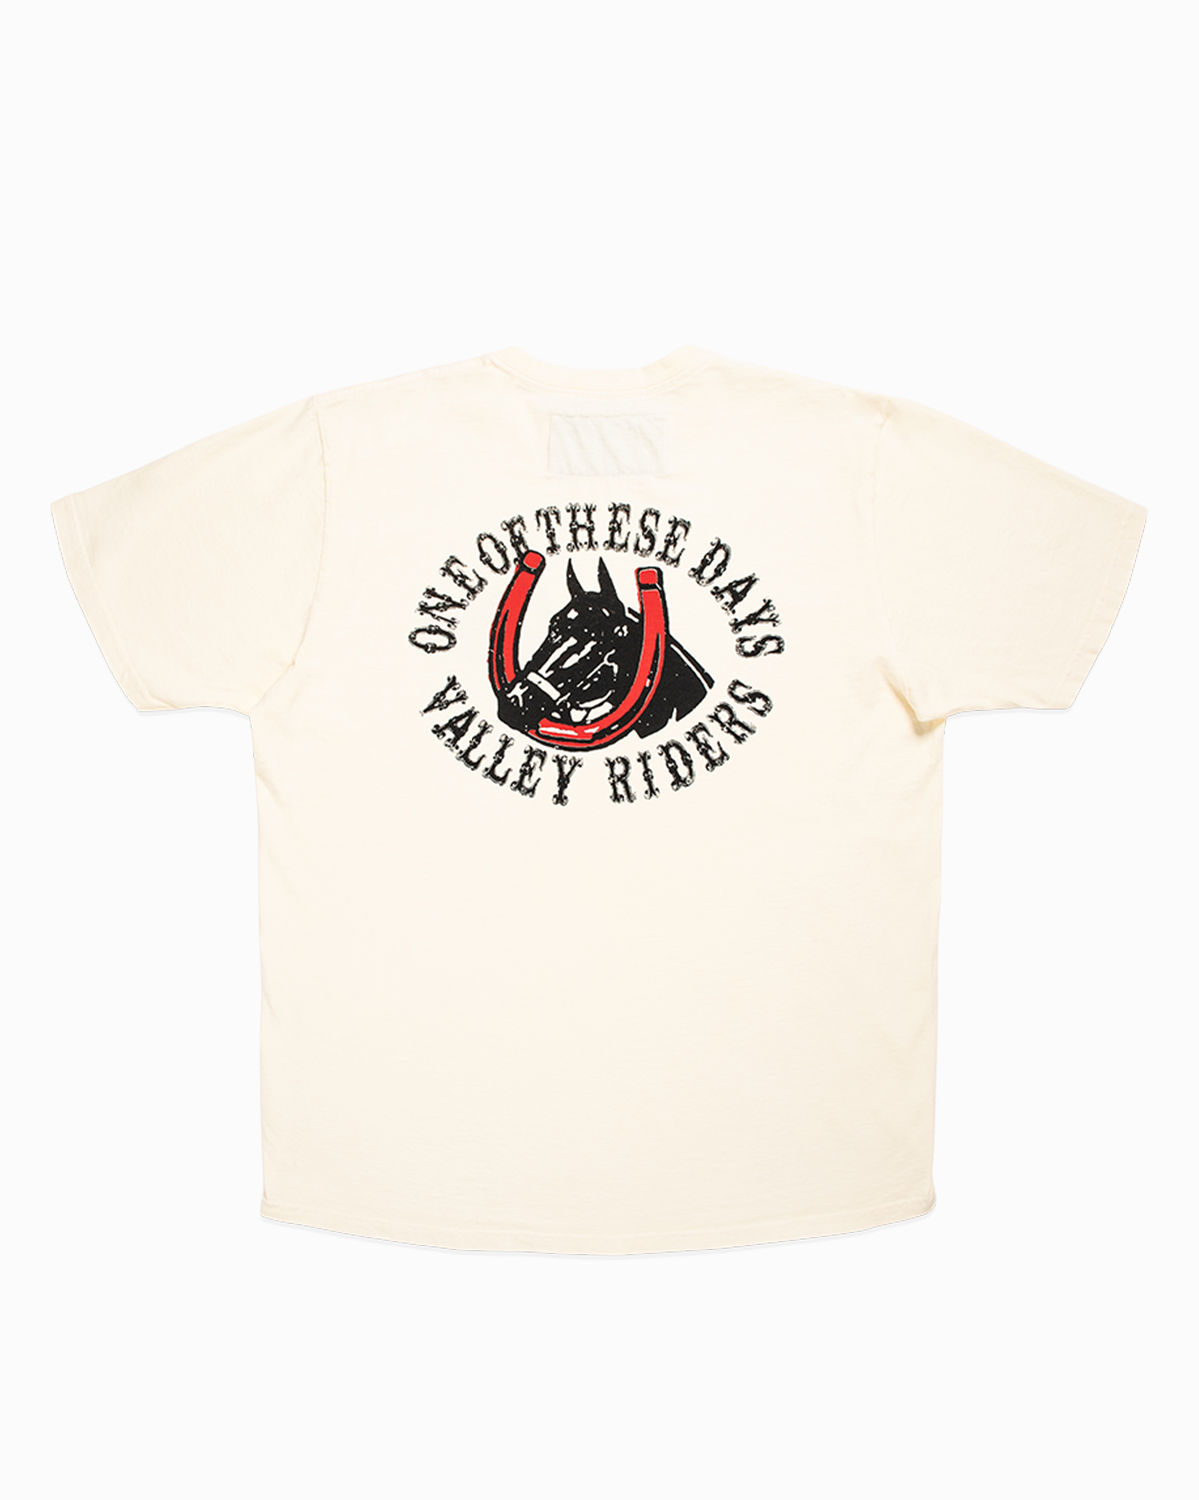 ONE OF THESE DAYS - VALLEY RIDERS TEE - WHITE